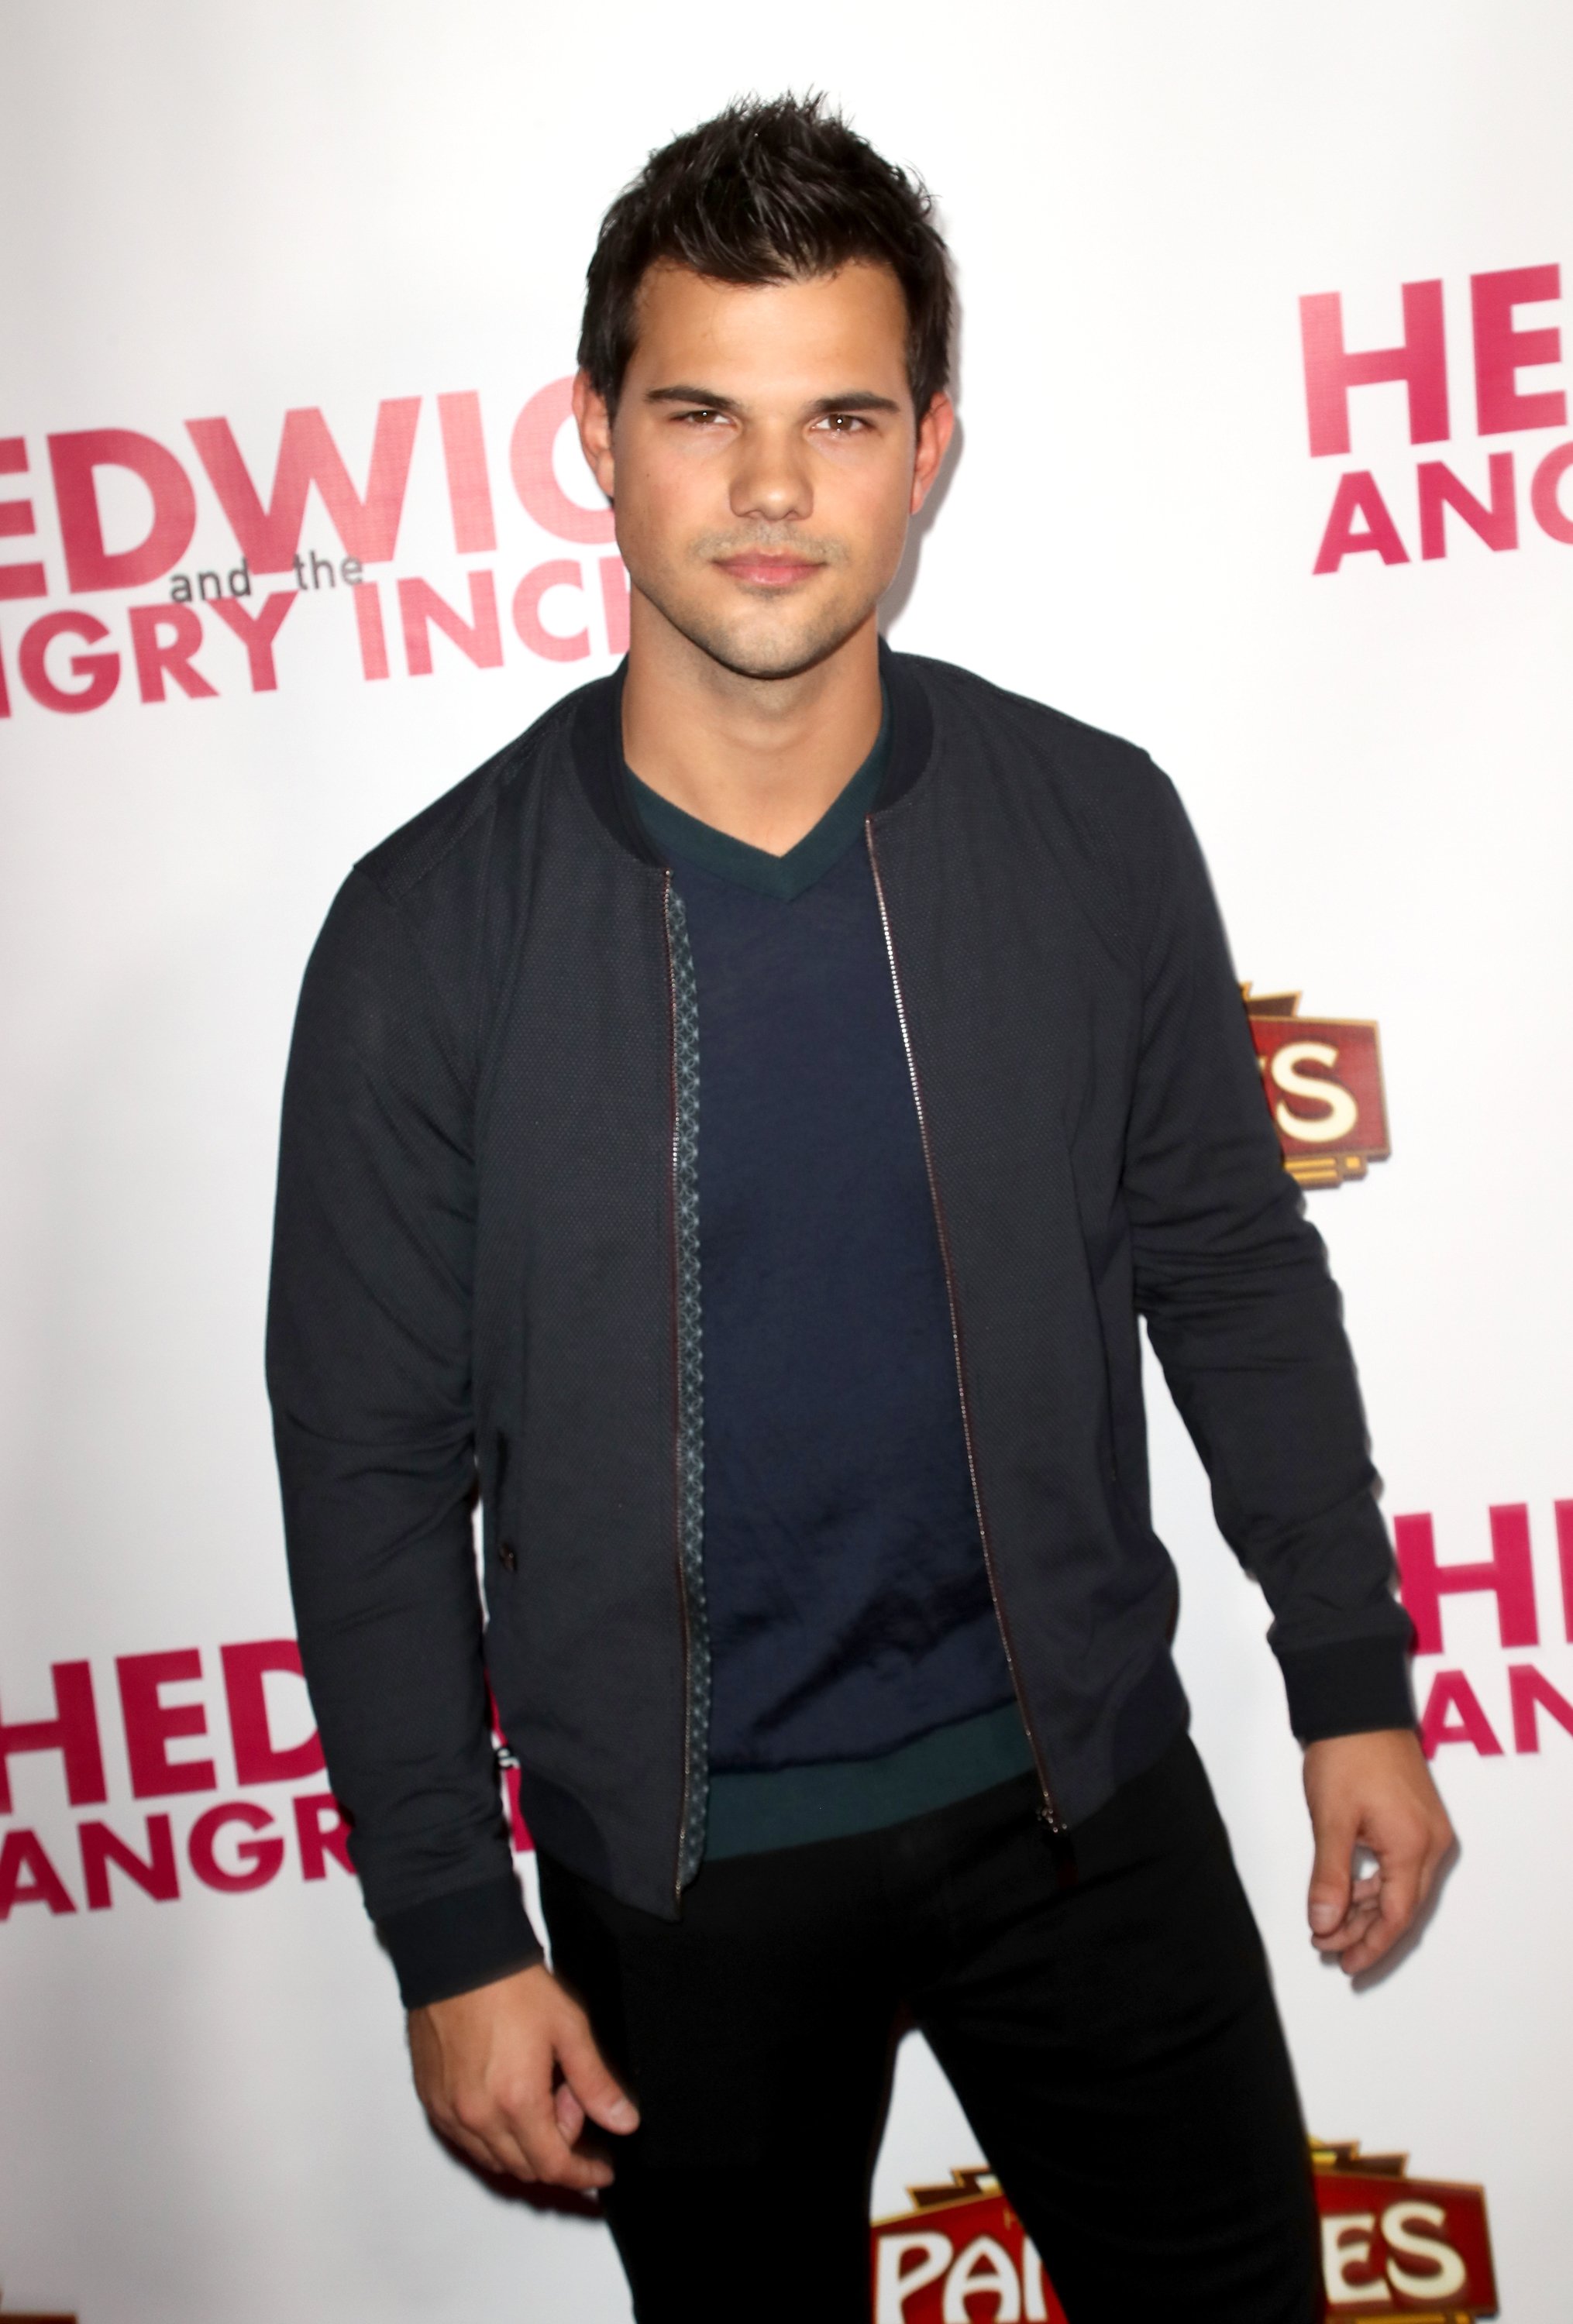 Taylor Lautner is pictured at the opening night of "Hedwig and the Angry Inch" at the Pantages Theatre on November 2, 2016, in Hollywood, California | Source: Getty Images